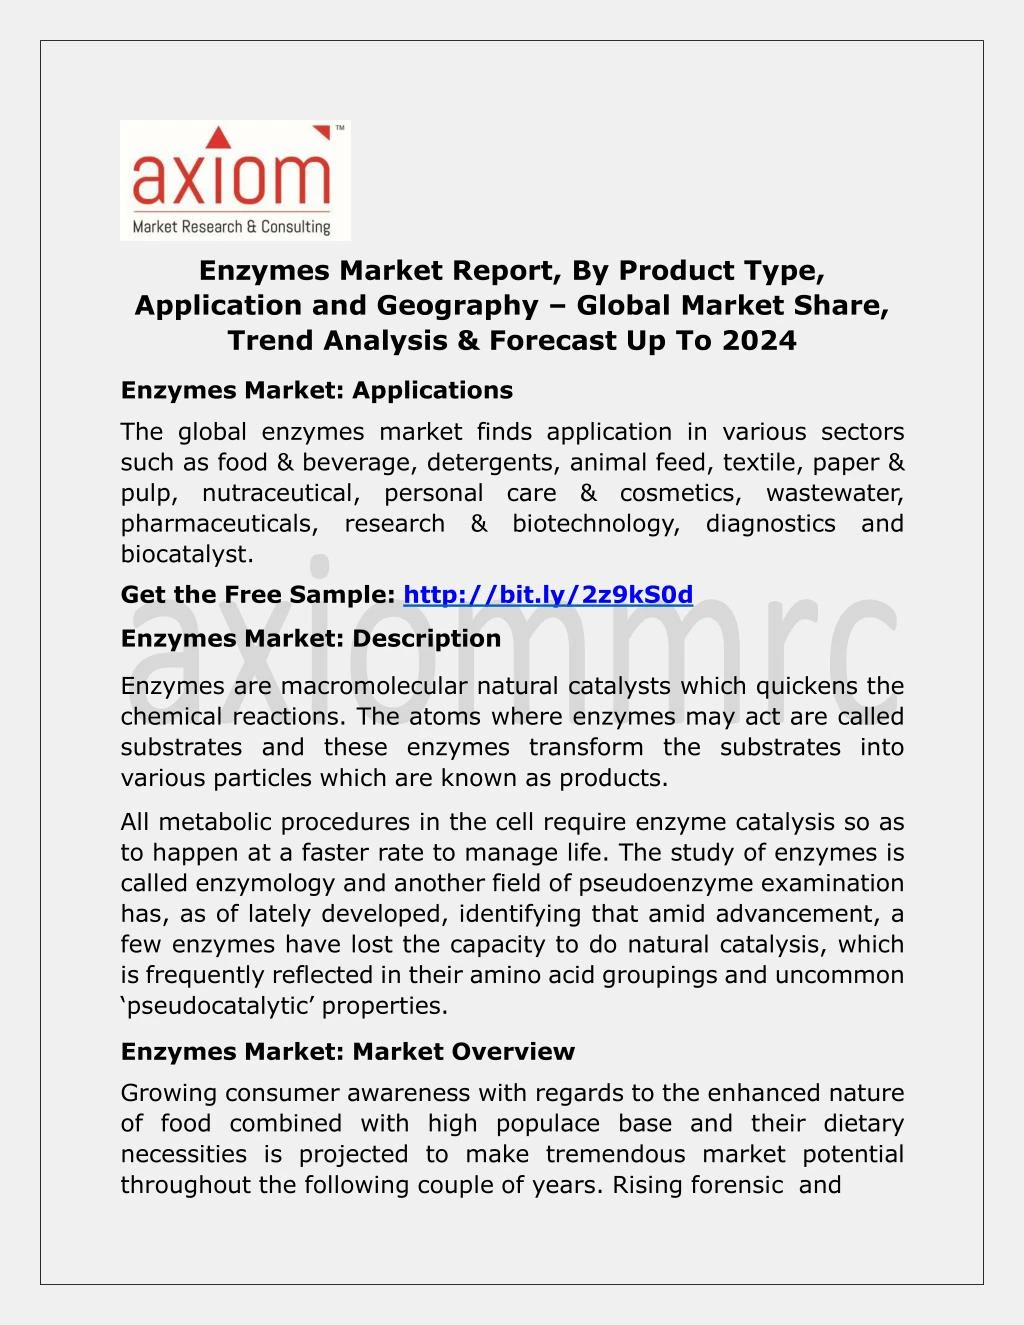 enzymes market report by product type application